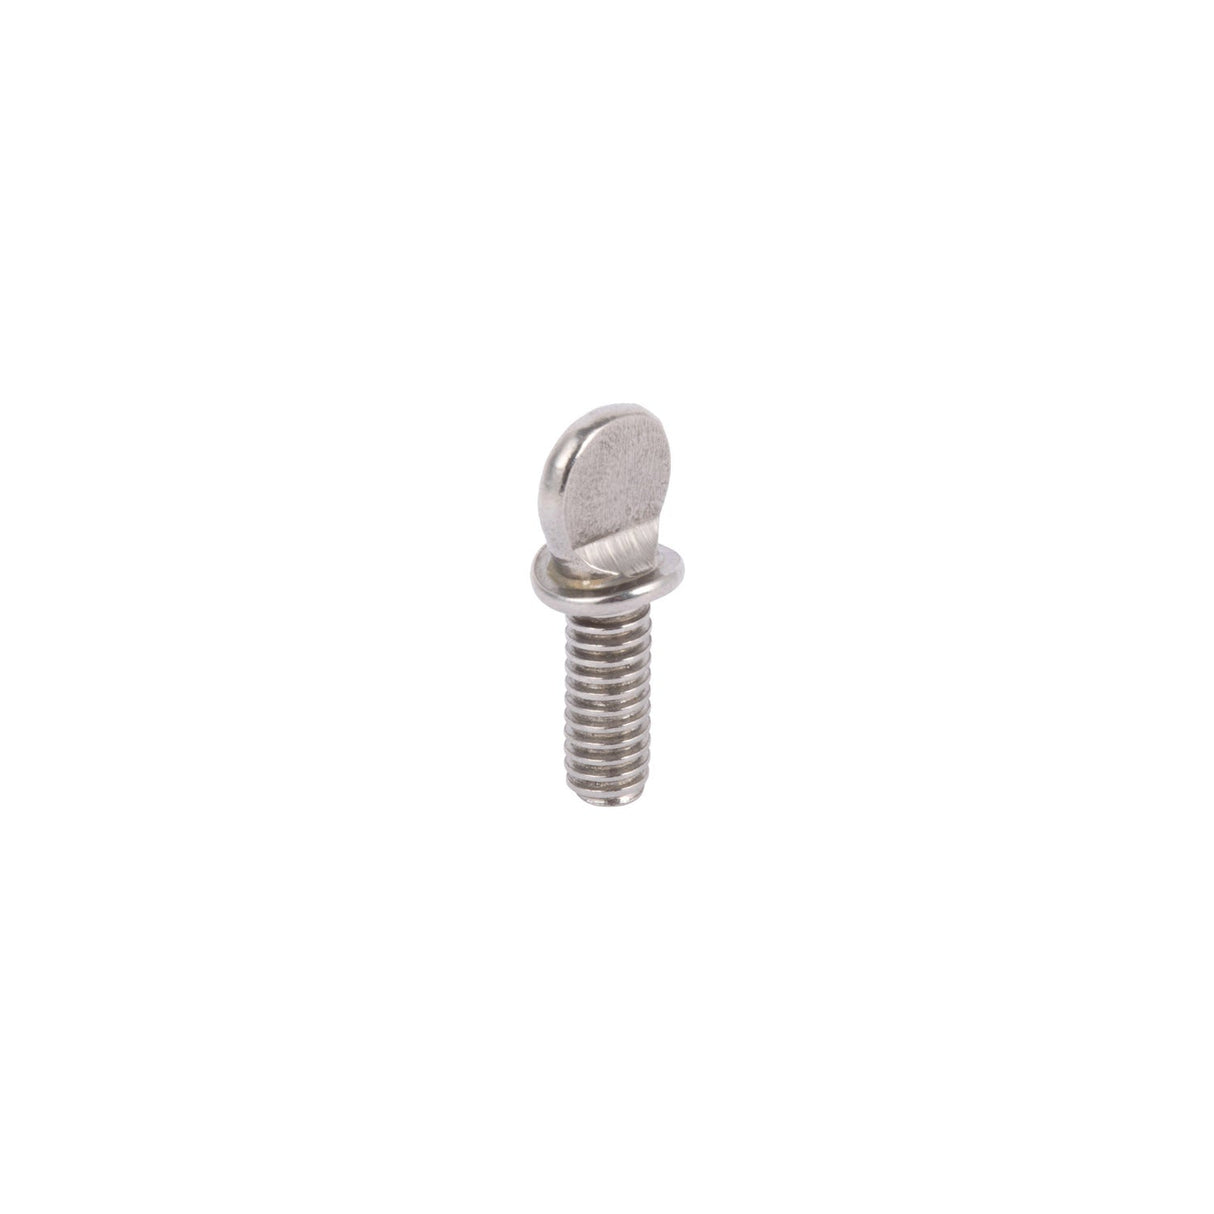 Thumb Screw for FPDC-S/L, FPSL & FPFC-W Series